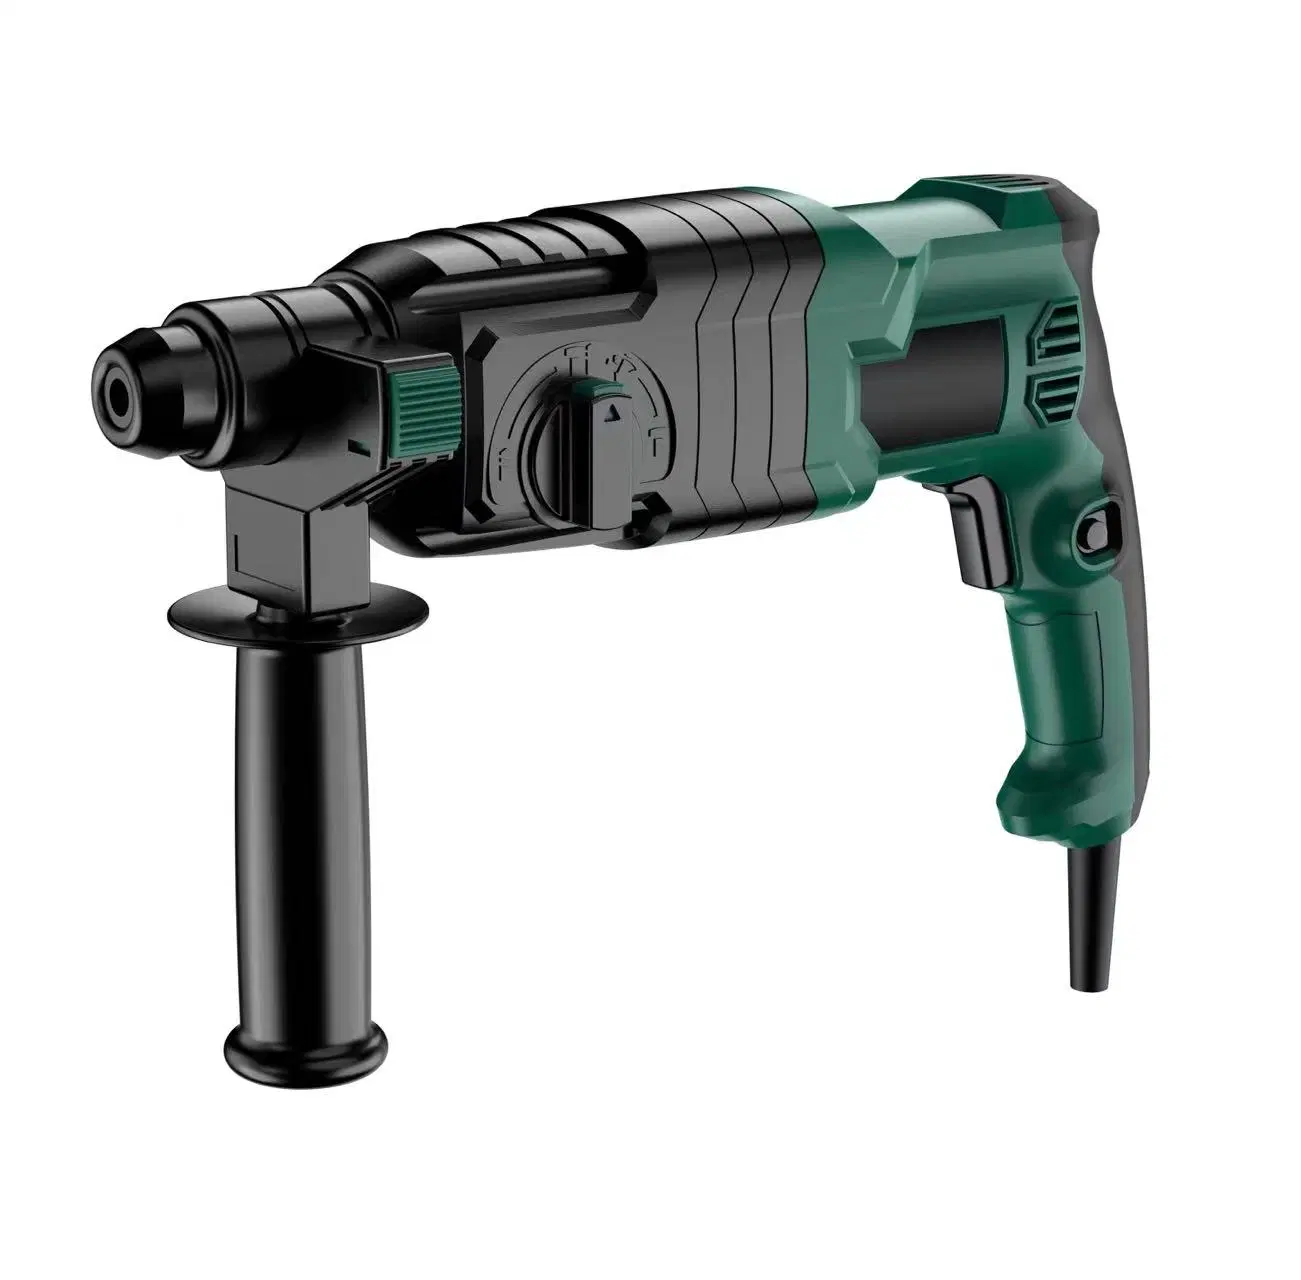 China Manufacture Rotary Hammer Drill 26mm Variable Speed Electric Hammer